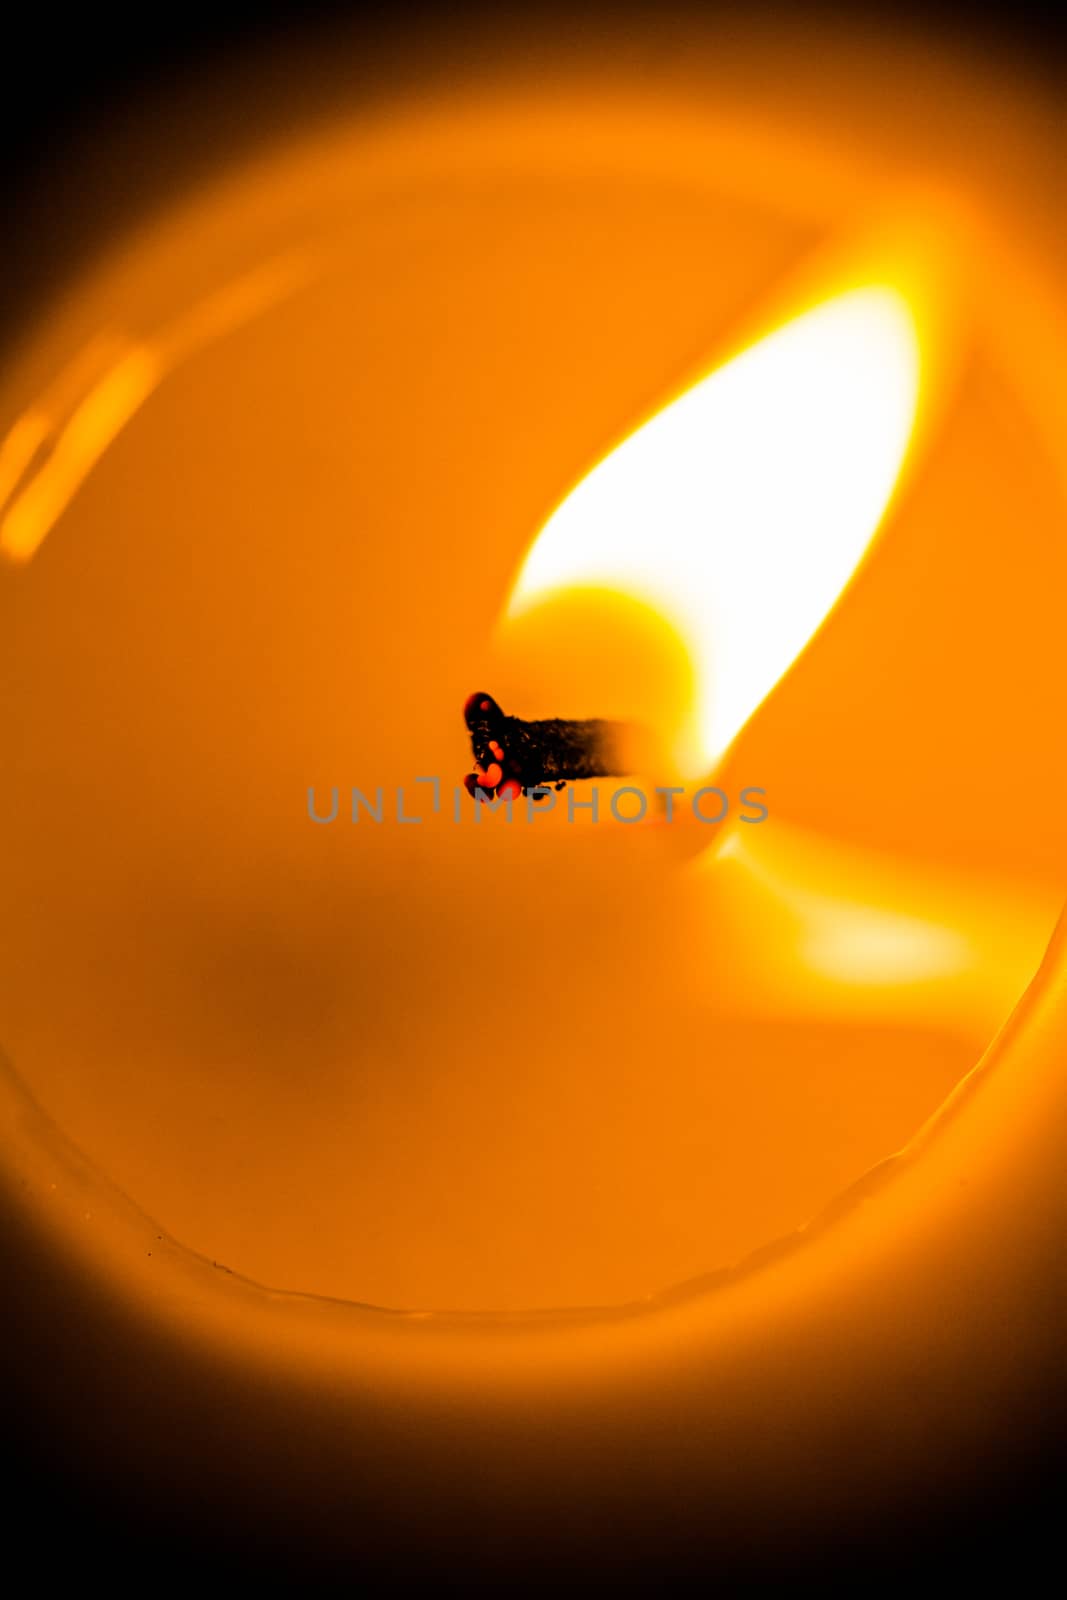 Extreme Closeup of a Candle Wick Burning